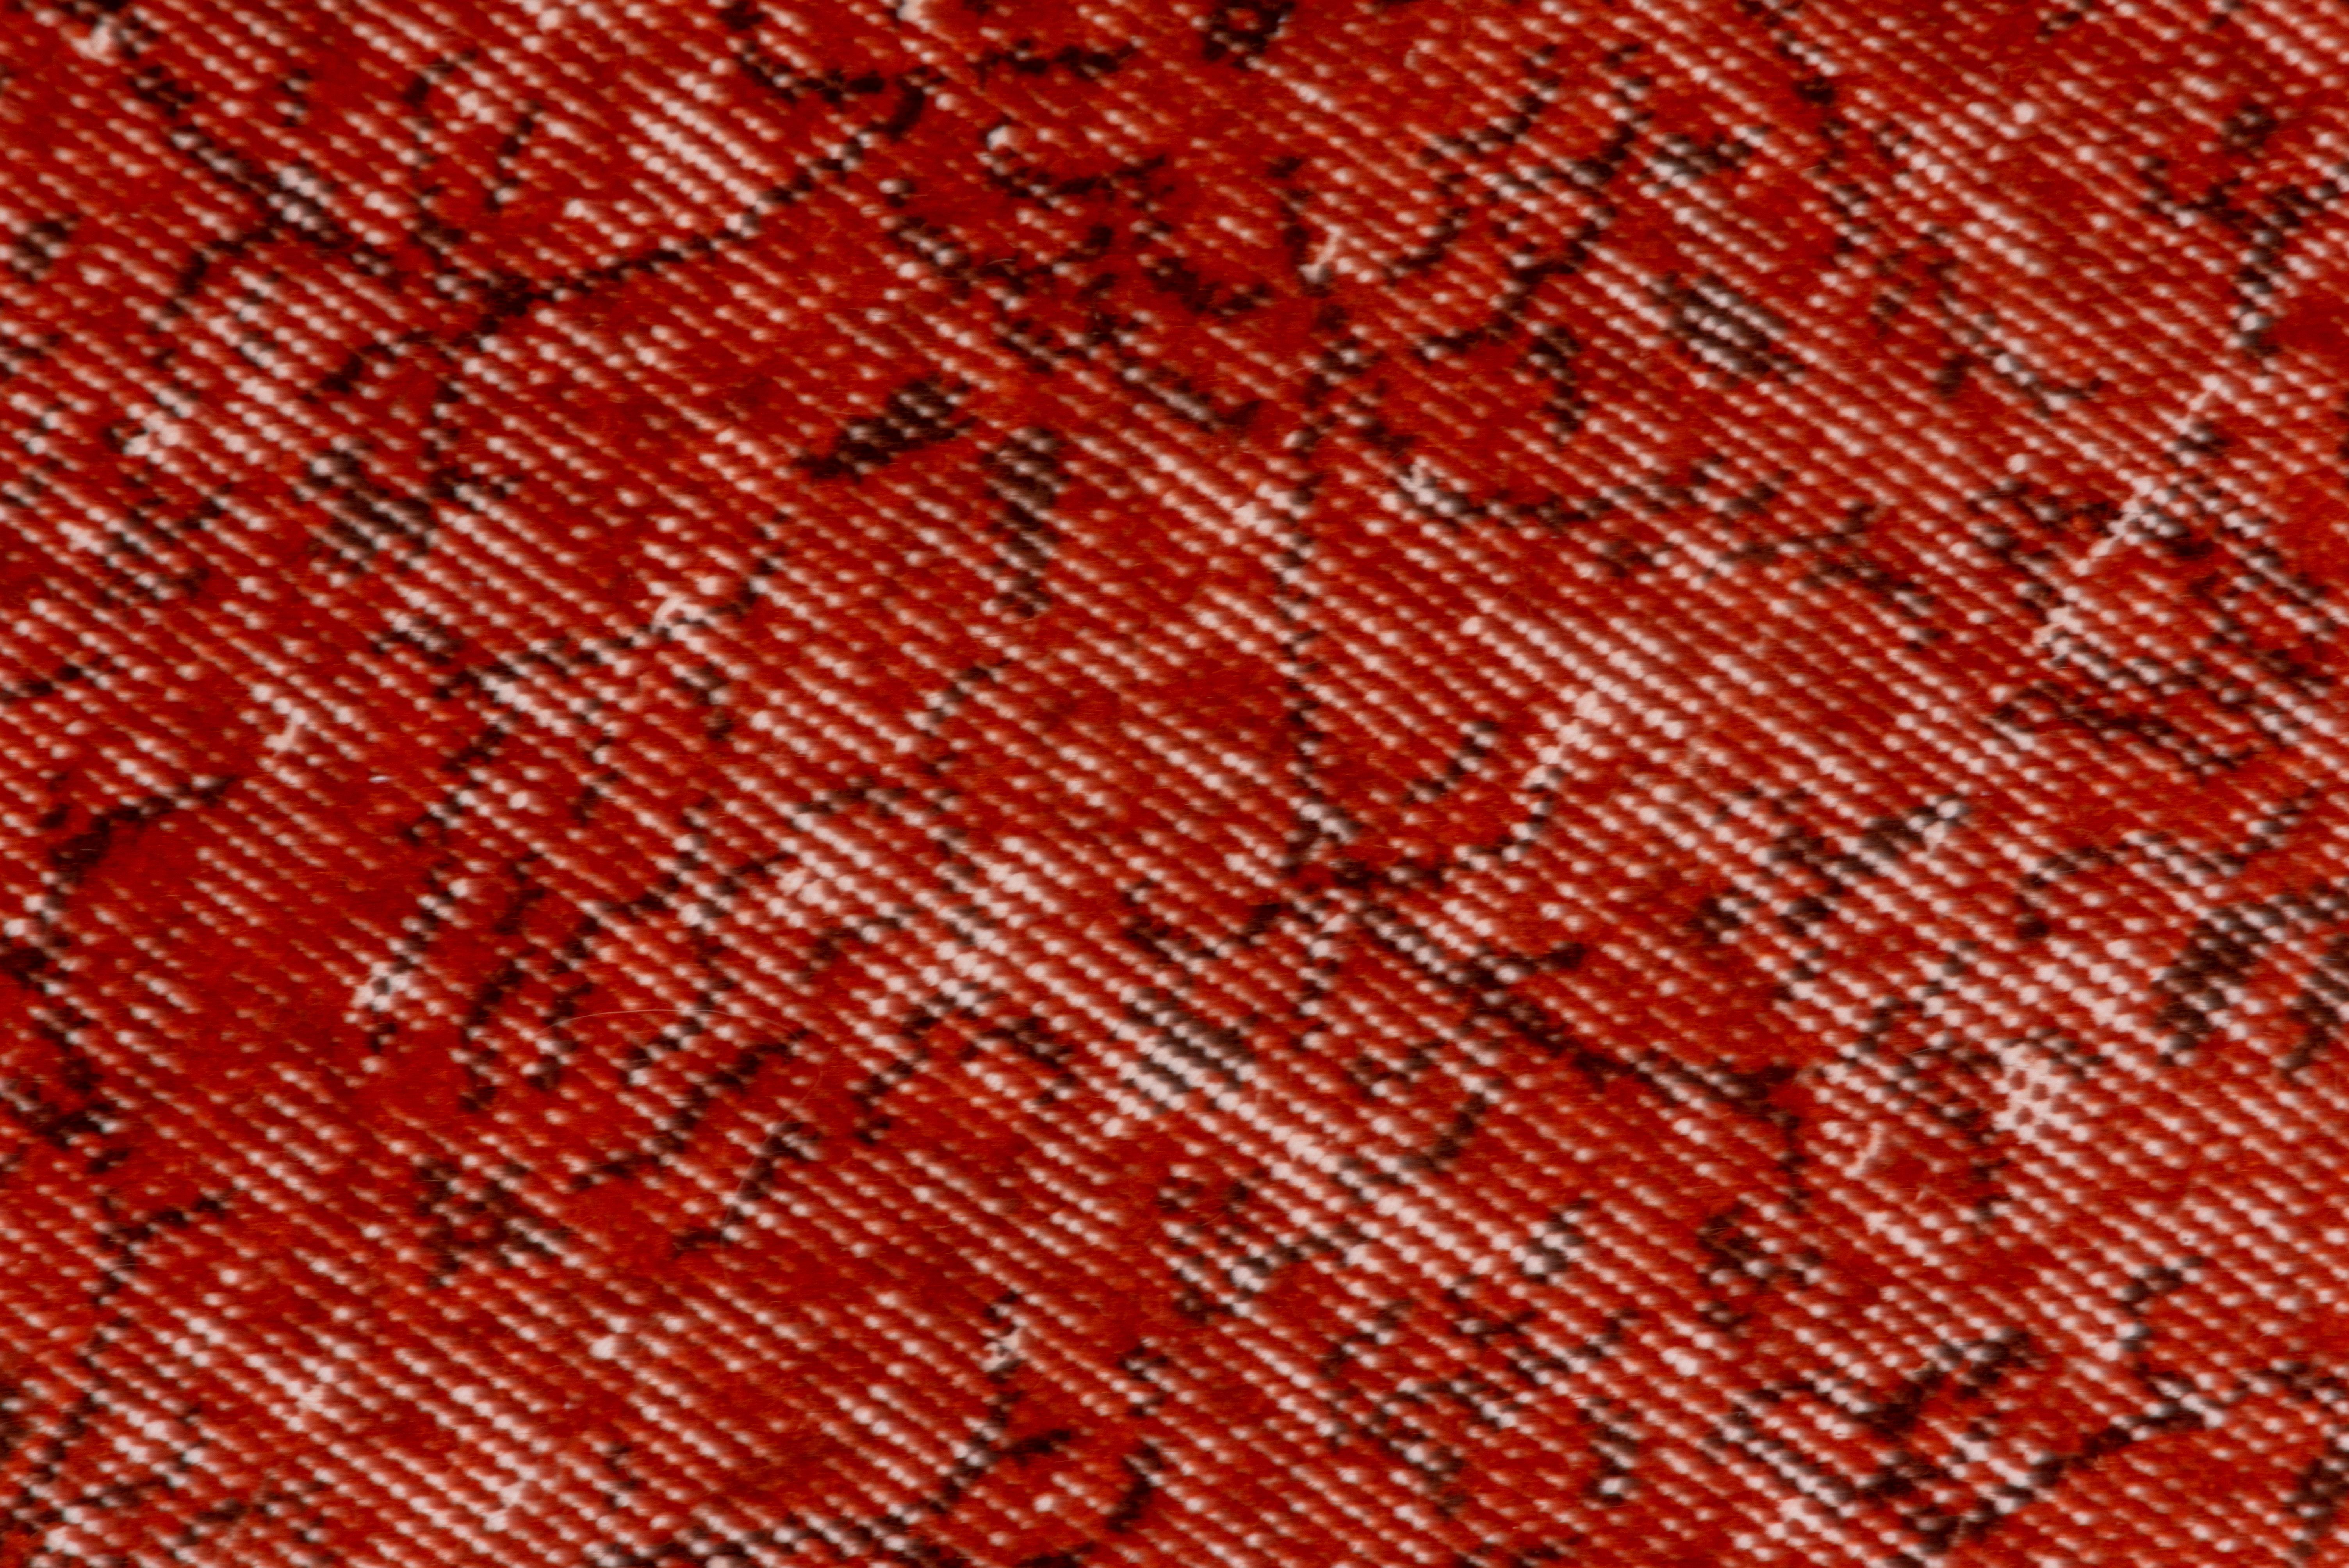 This distressed and orange-red overdyed carpet shows several random vertical, ecru zig-zags dominating a black squiggle pattern. A strong color splash.